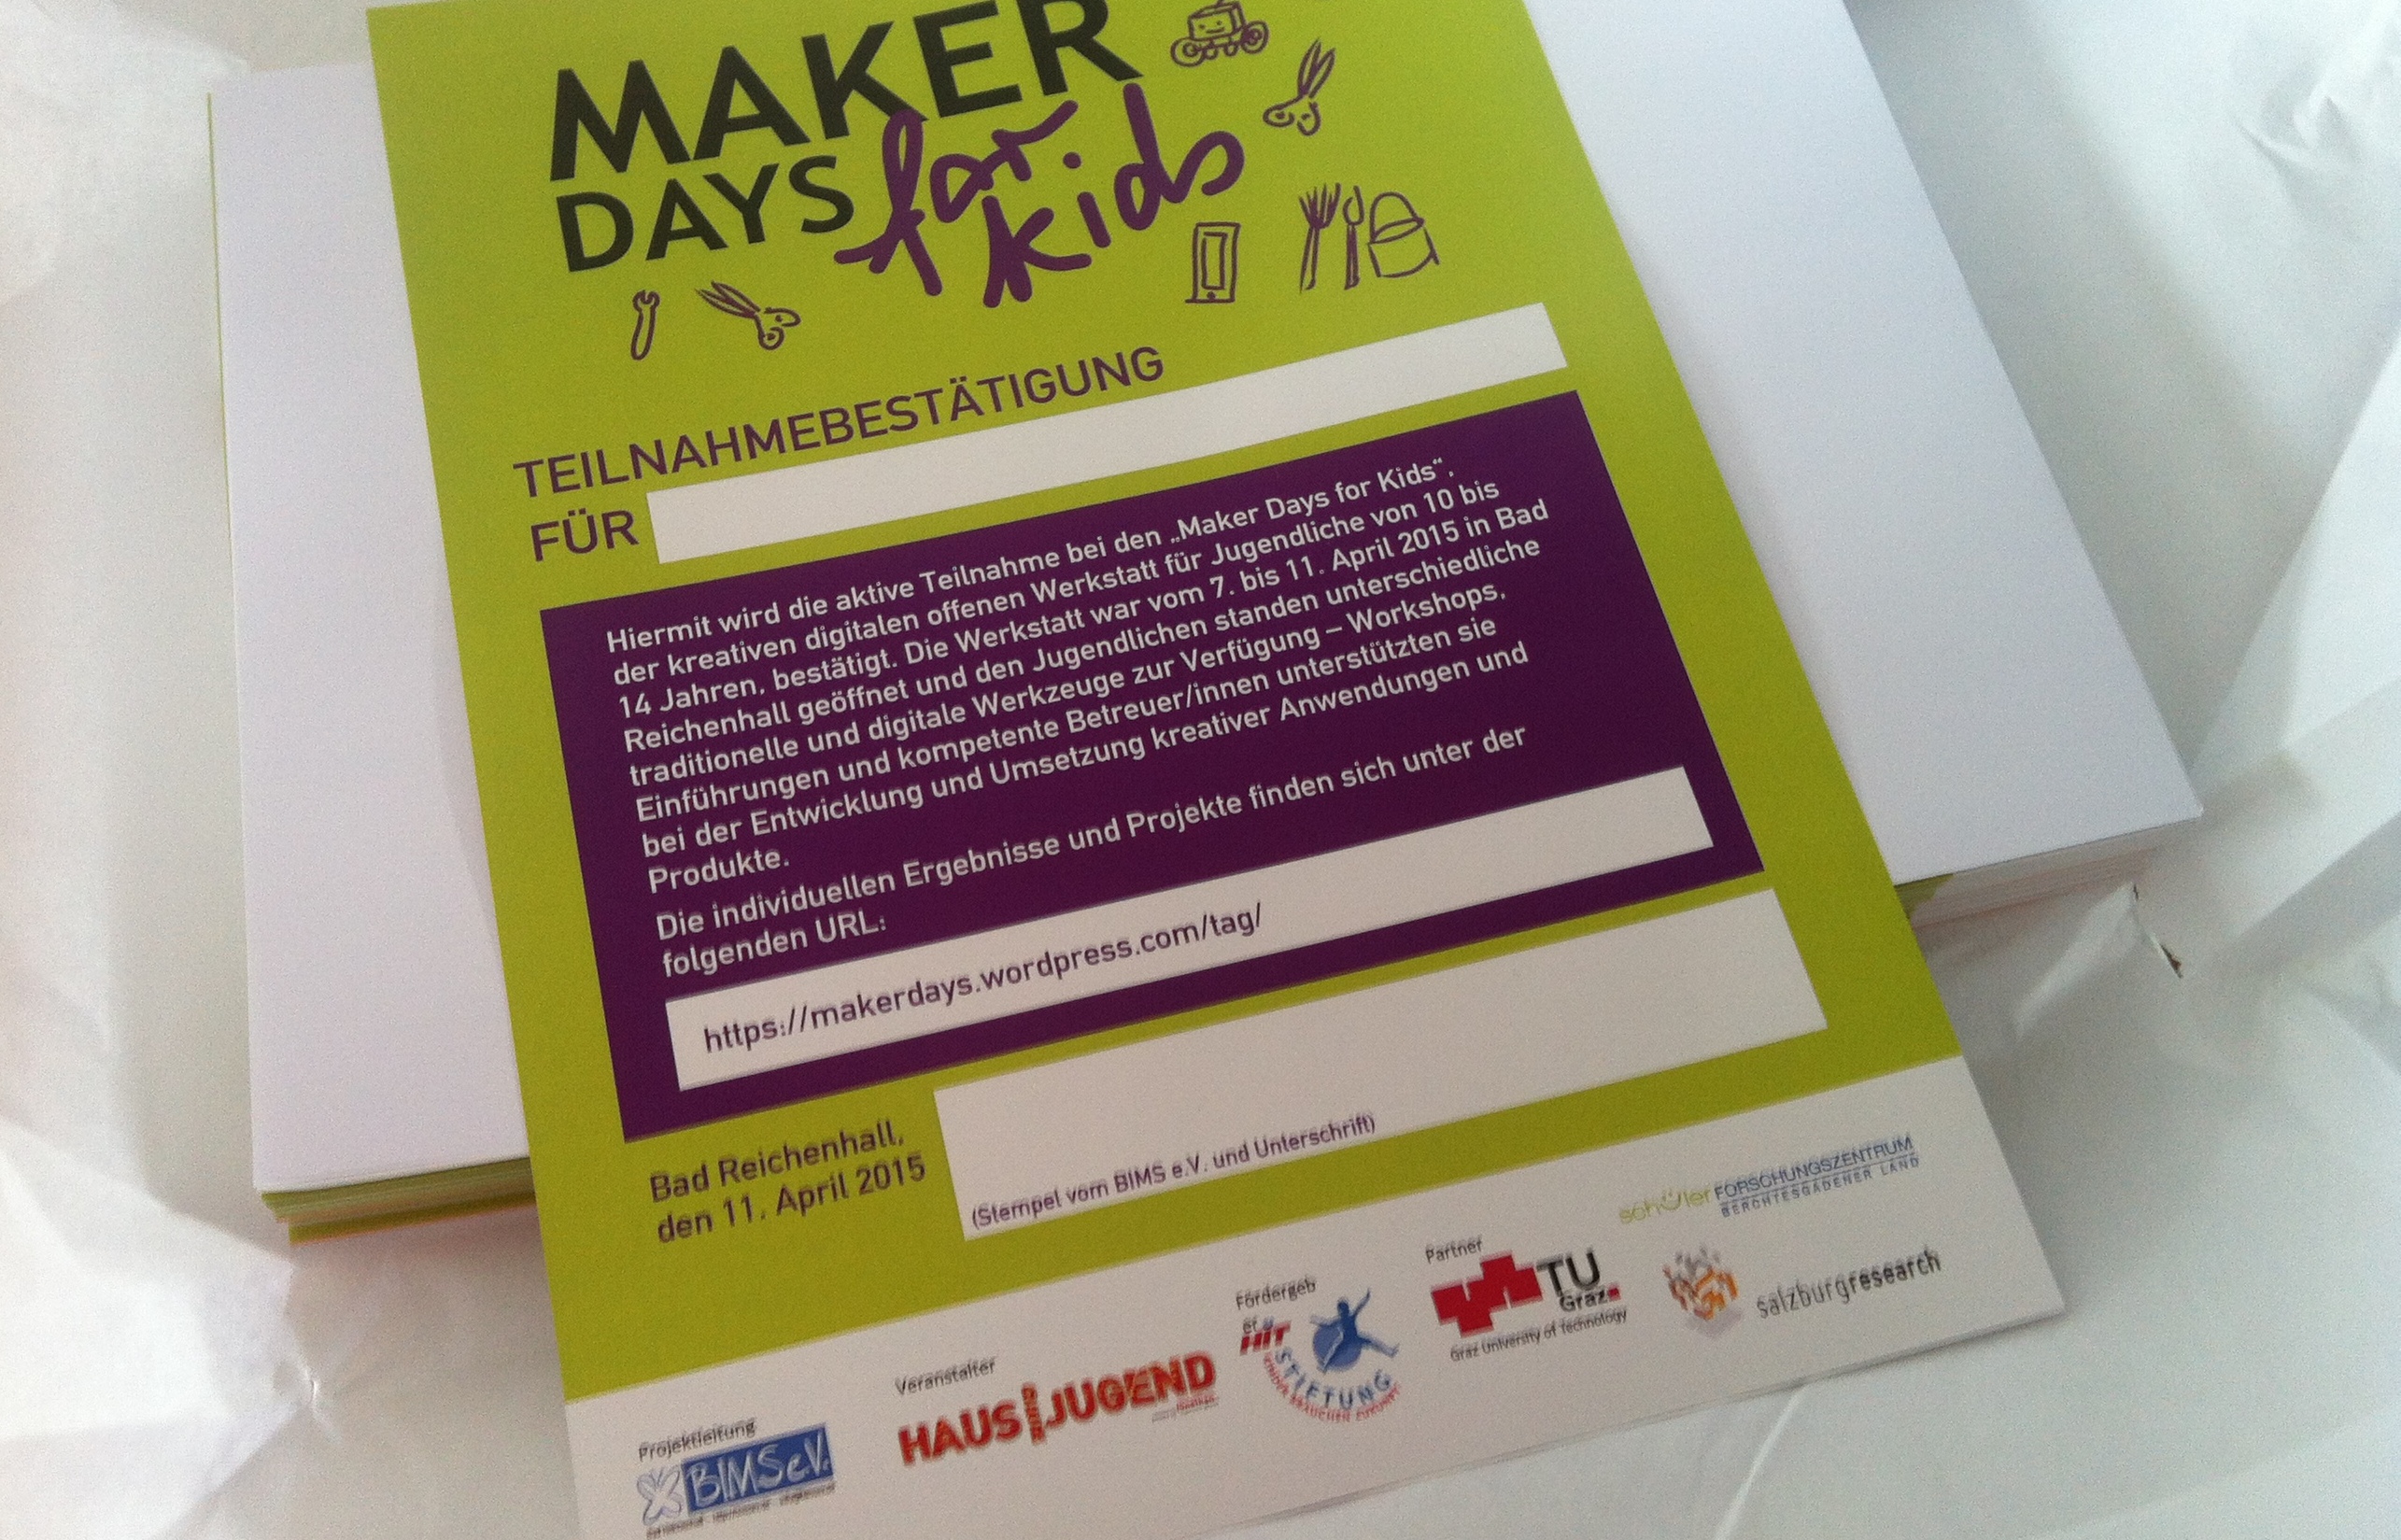 CC BY Maker DAYS FOR KIDS 2015 | http://makerdayswordpress.com, URL: https://creativecommons.org/licenses/by/3.0/de/